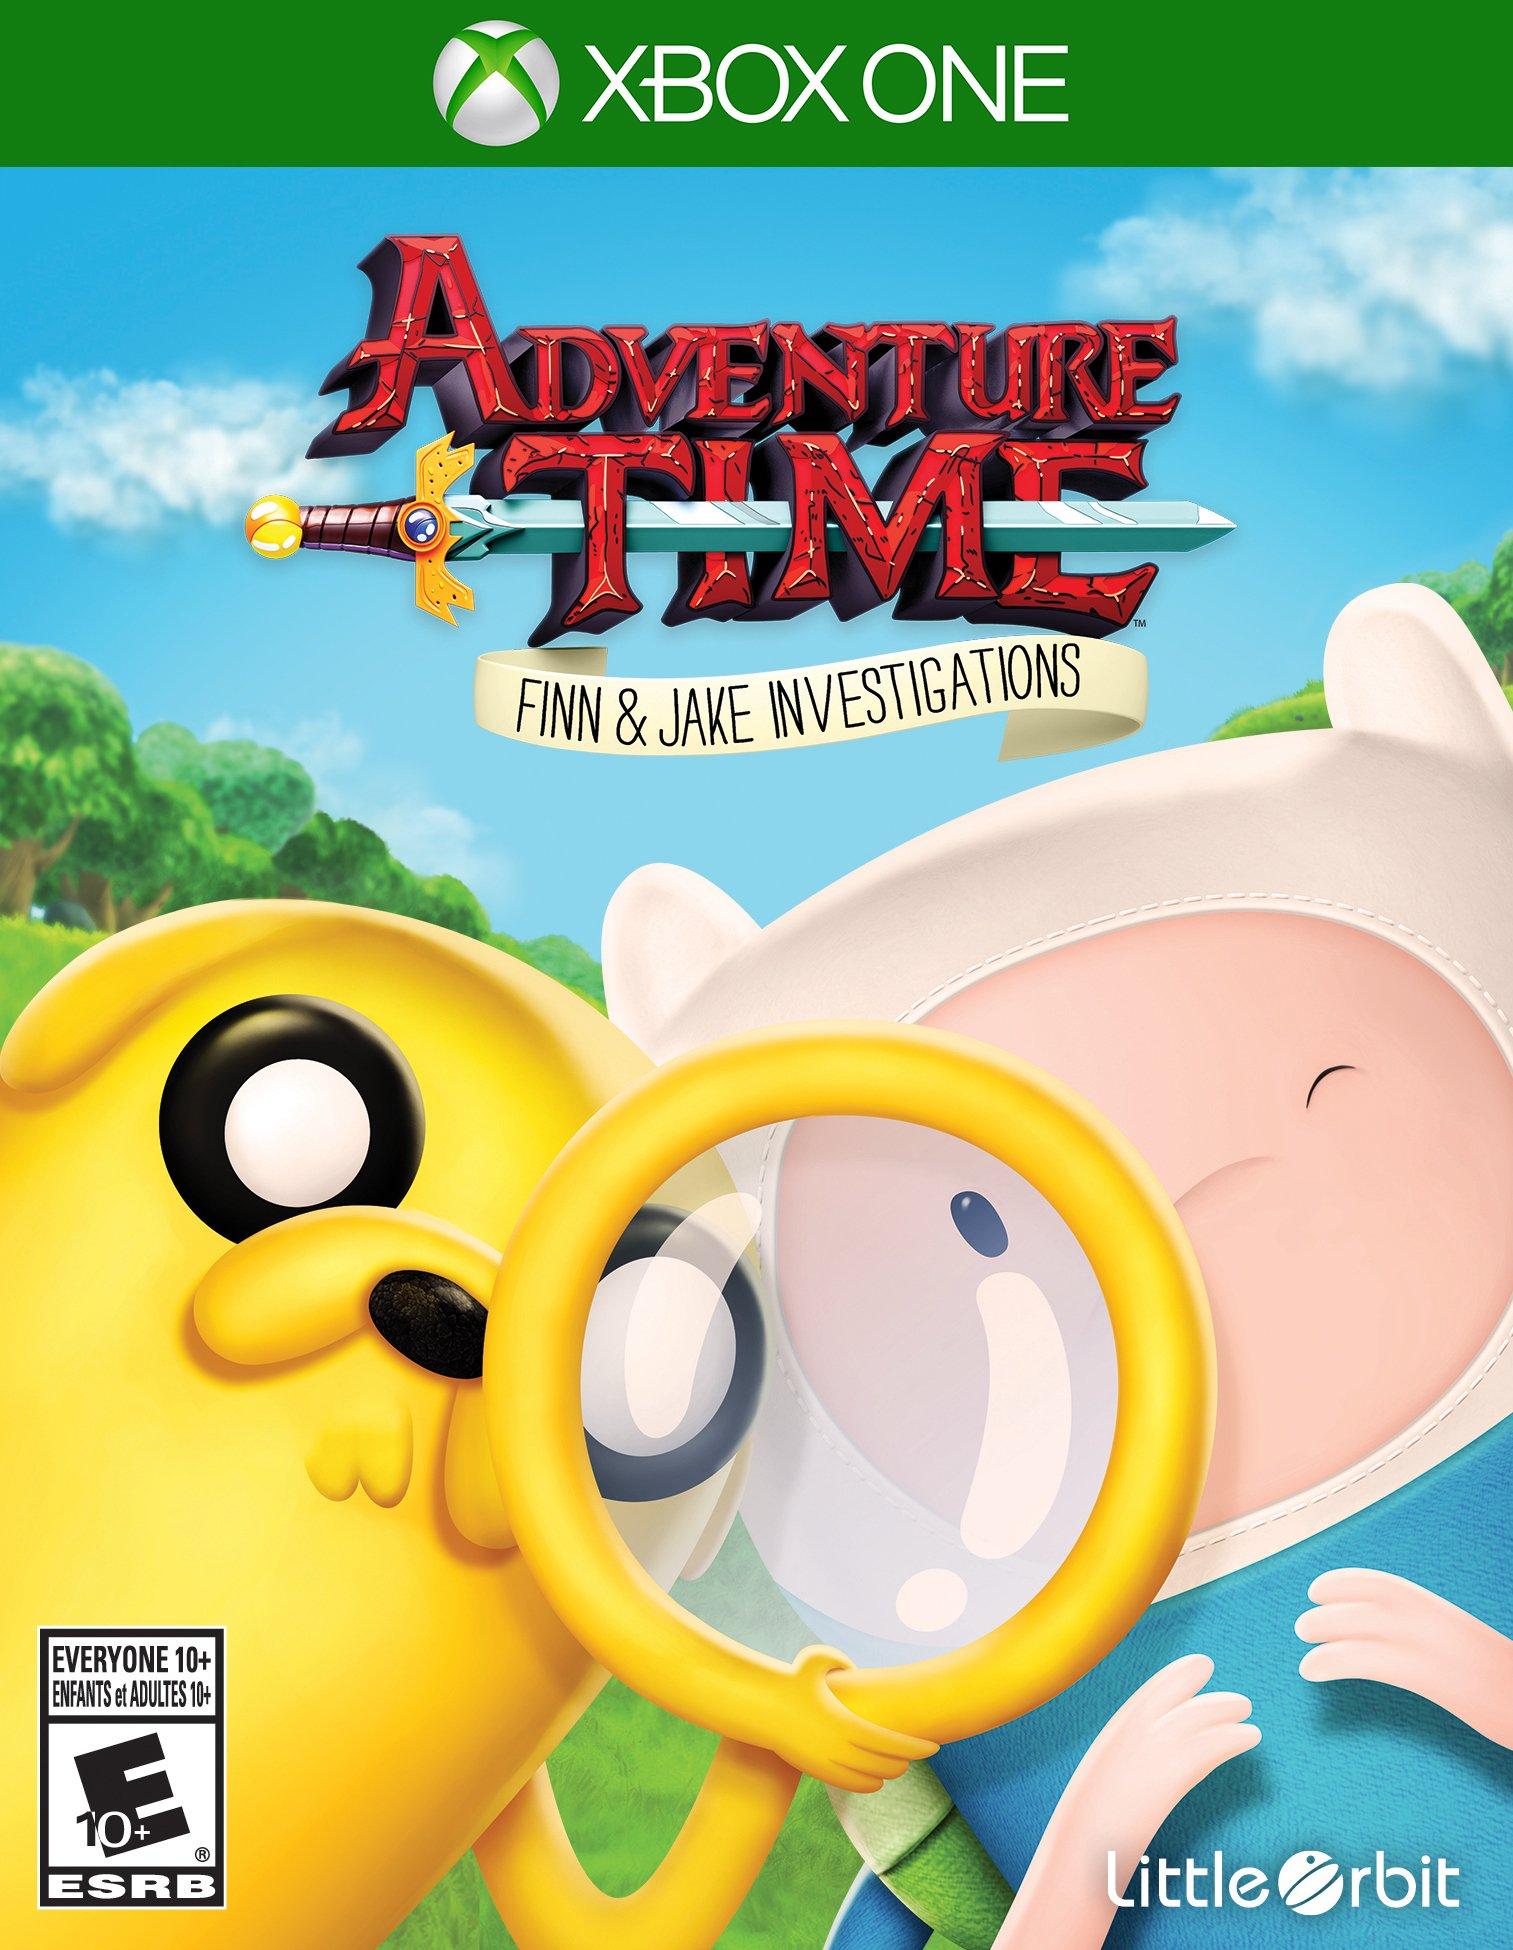 finn and jake video game